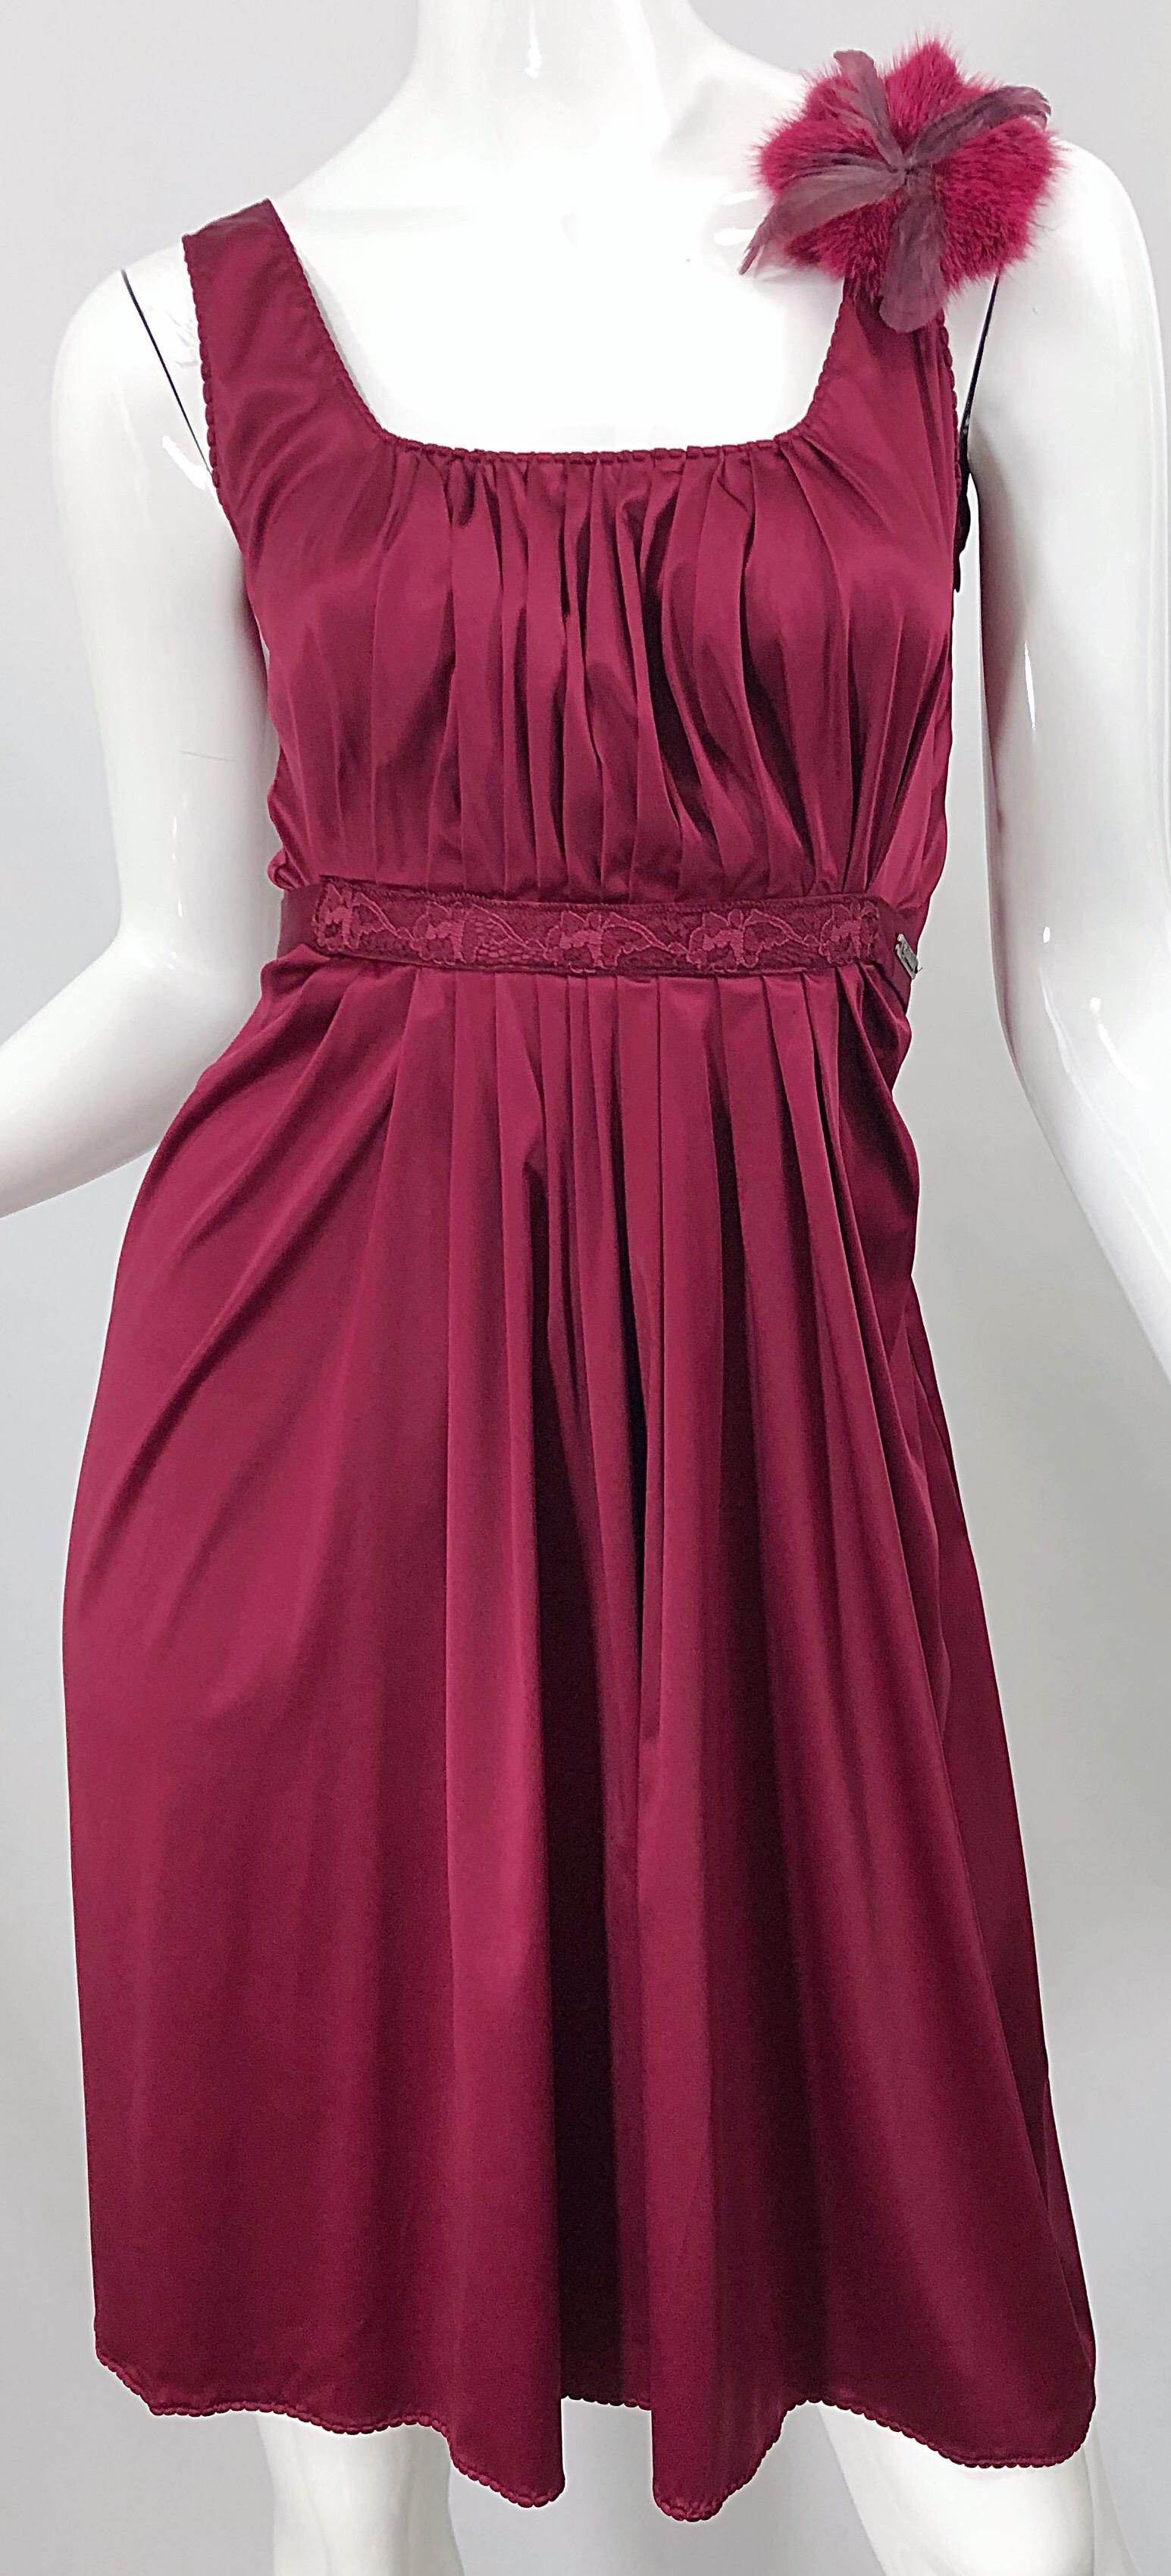 2000s John Galliano Sz 42 (US 6 / 8) Burgundy Silk Feather Brooch Babydoll Dress In Excellent Condition For Sale In San Diego, CA